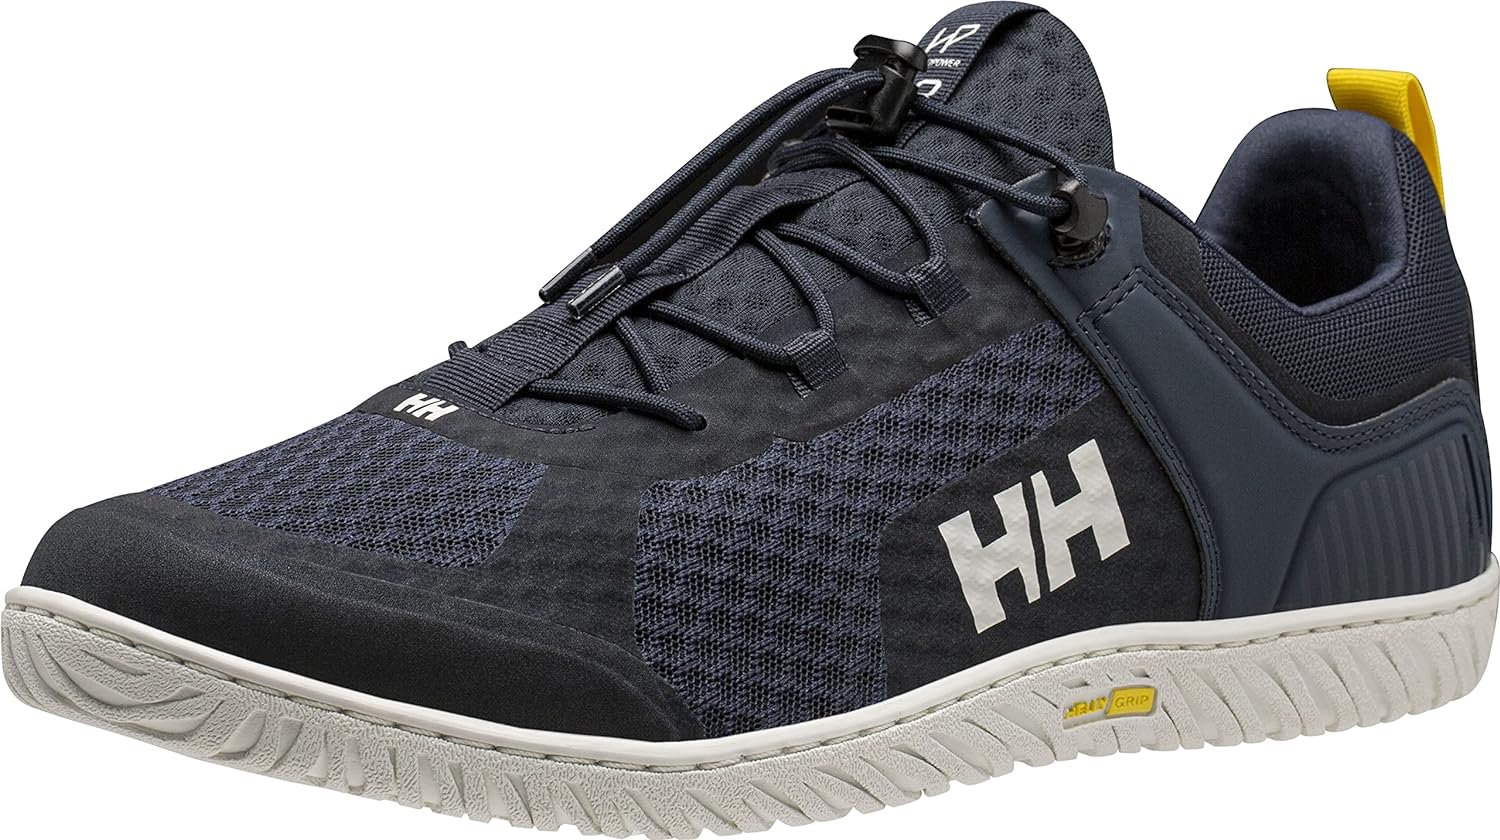 Read more about the article Helly Hansen Mens HP Foil V2 Sailing Shoes Review